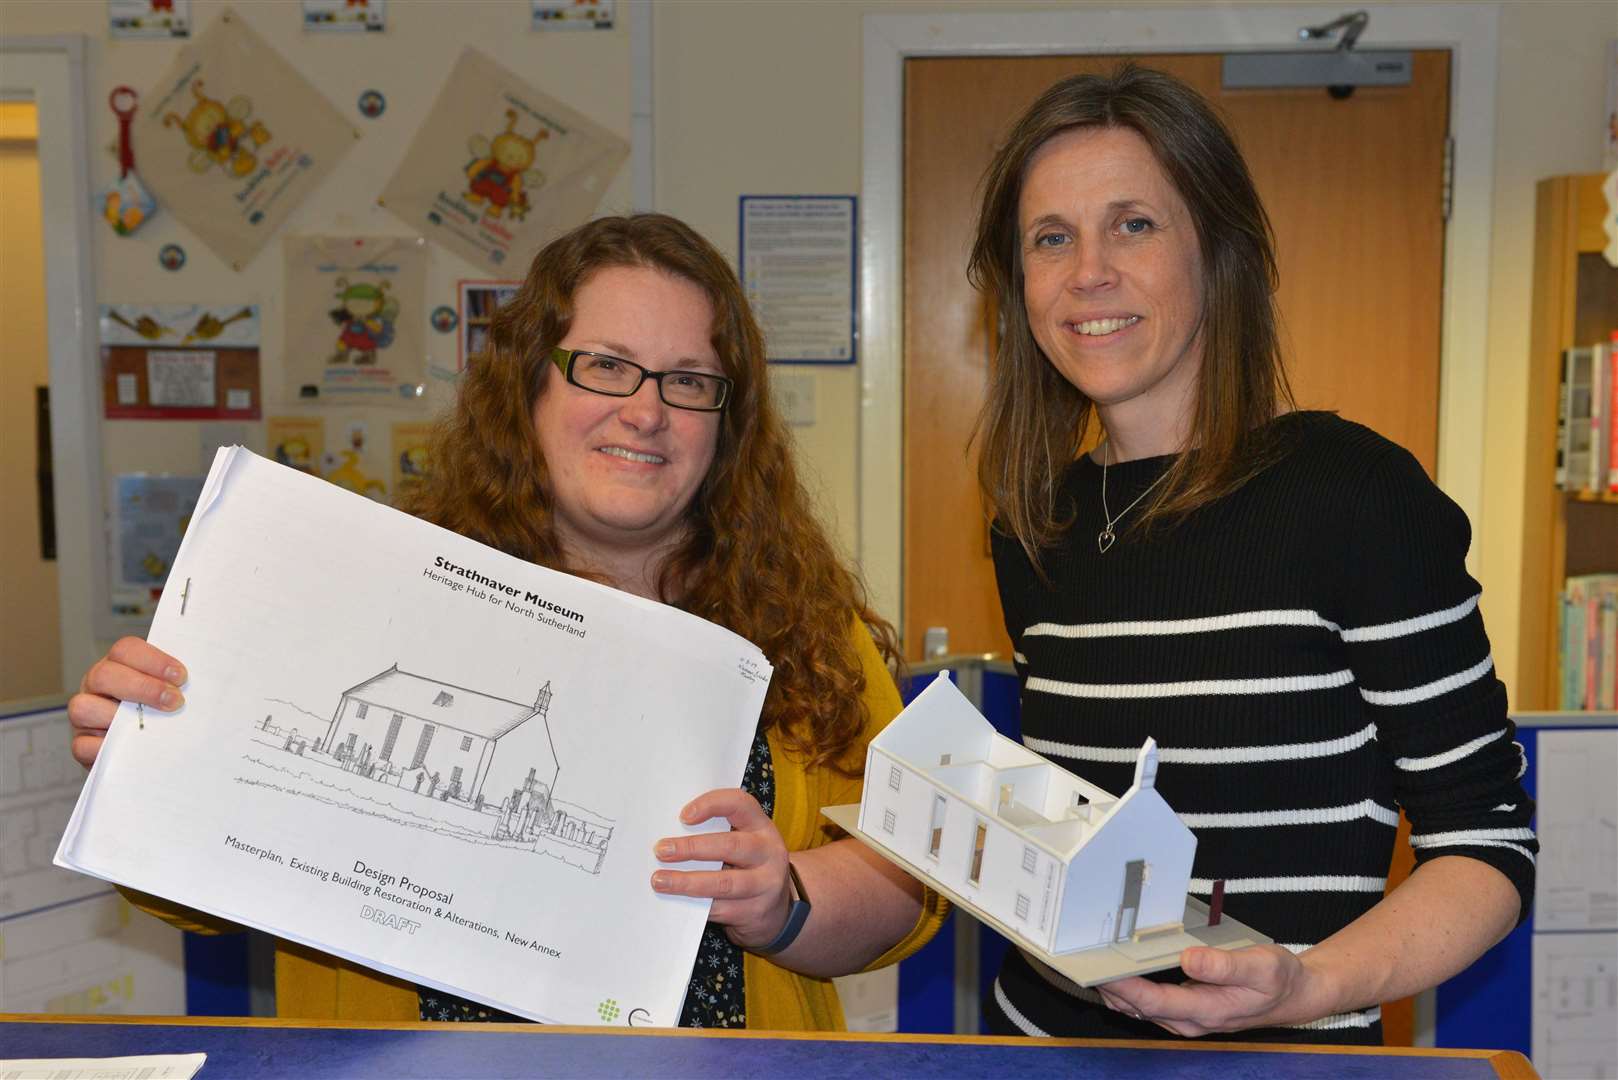 Museum development officer with architect Catriona Hill show off the design proposal for Strathnaver Museum at a public presentation in 2019.